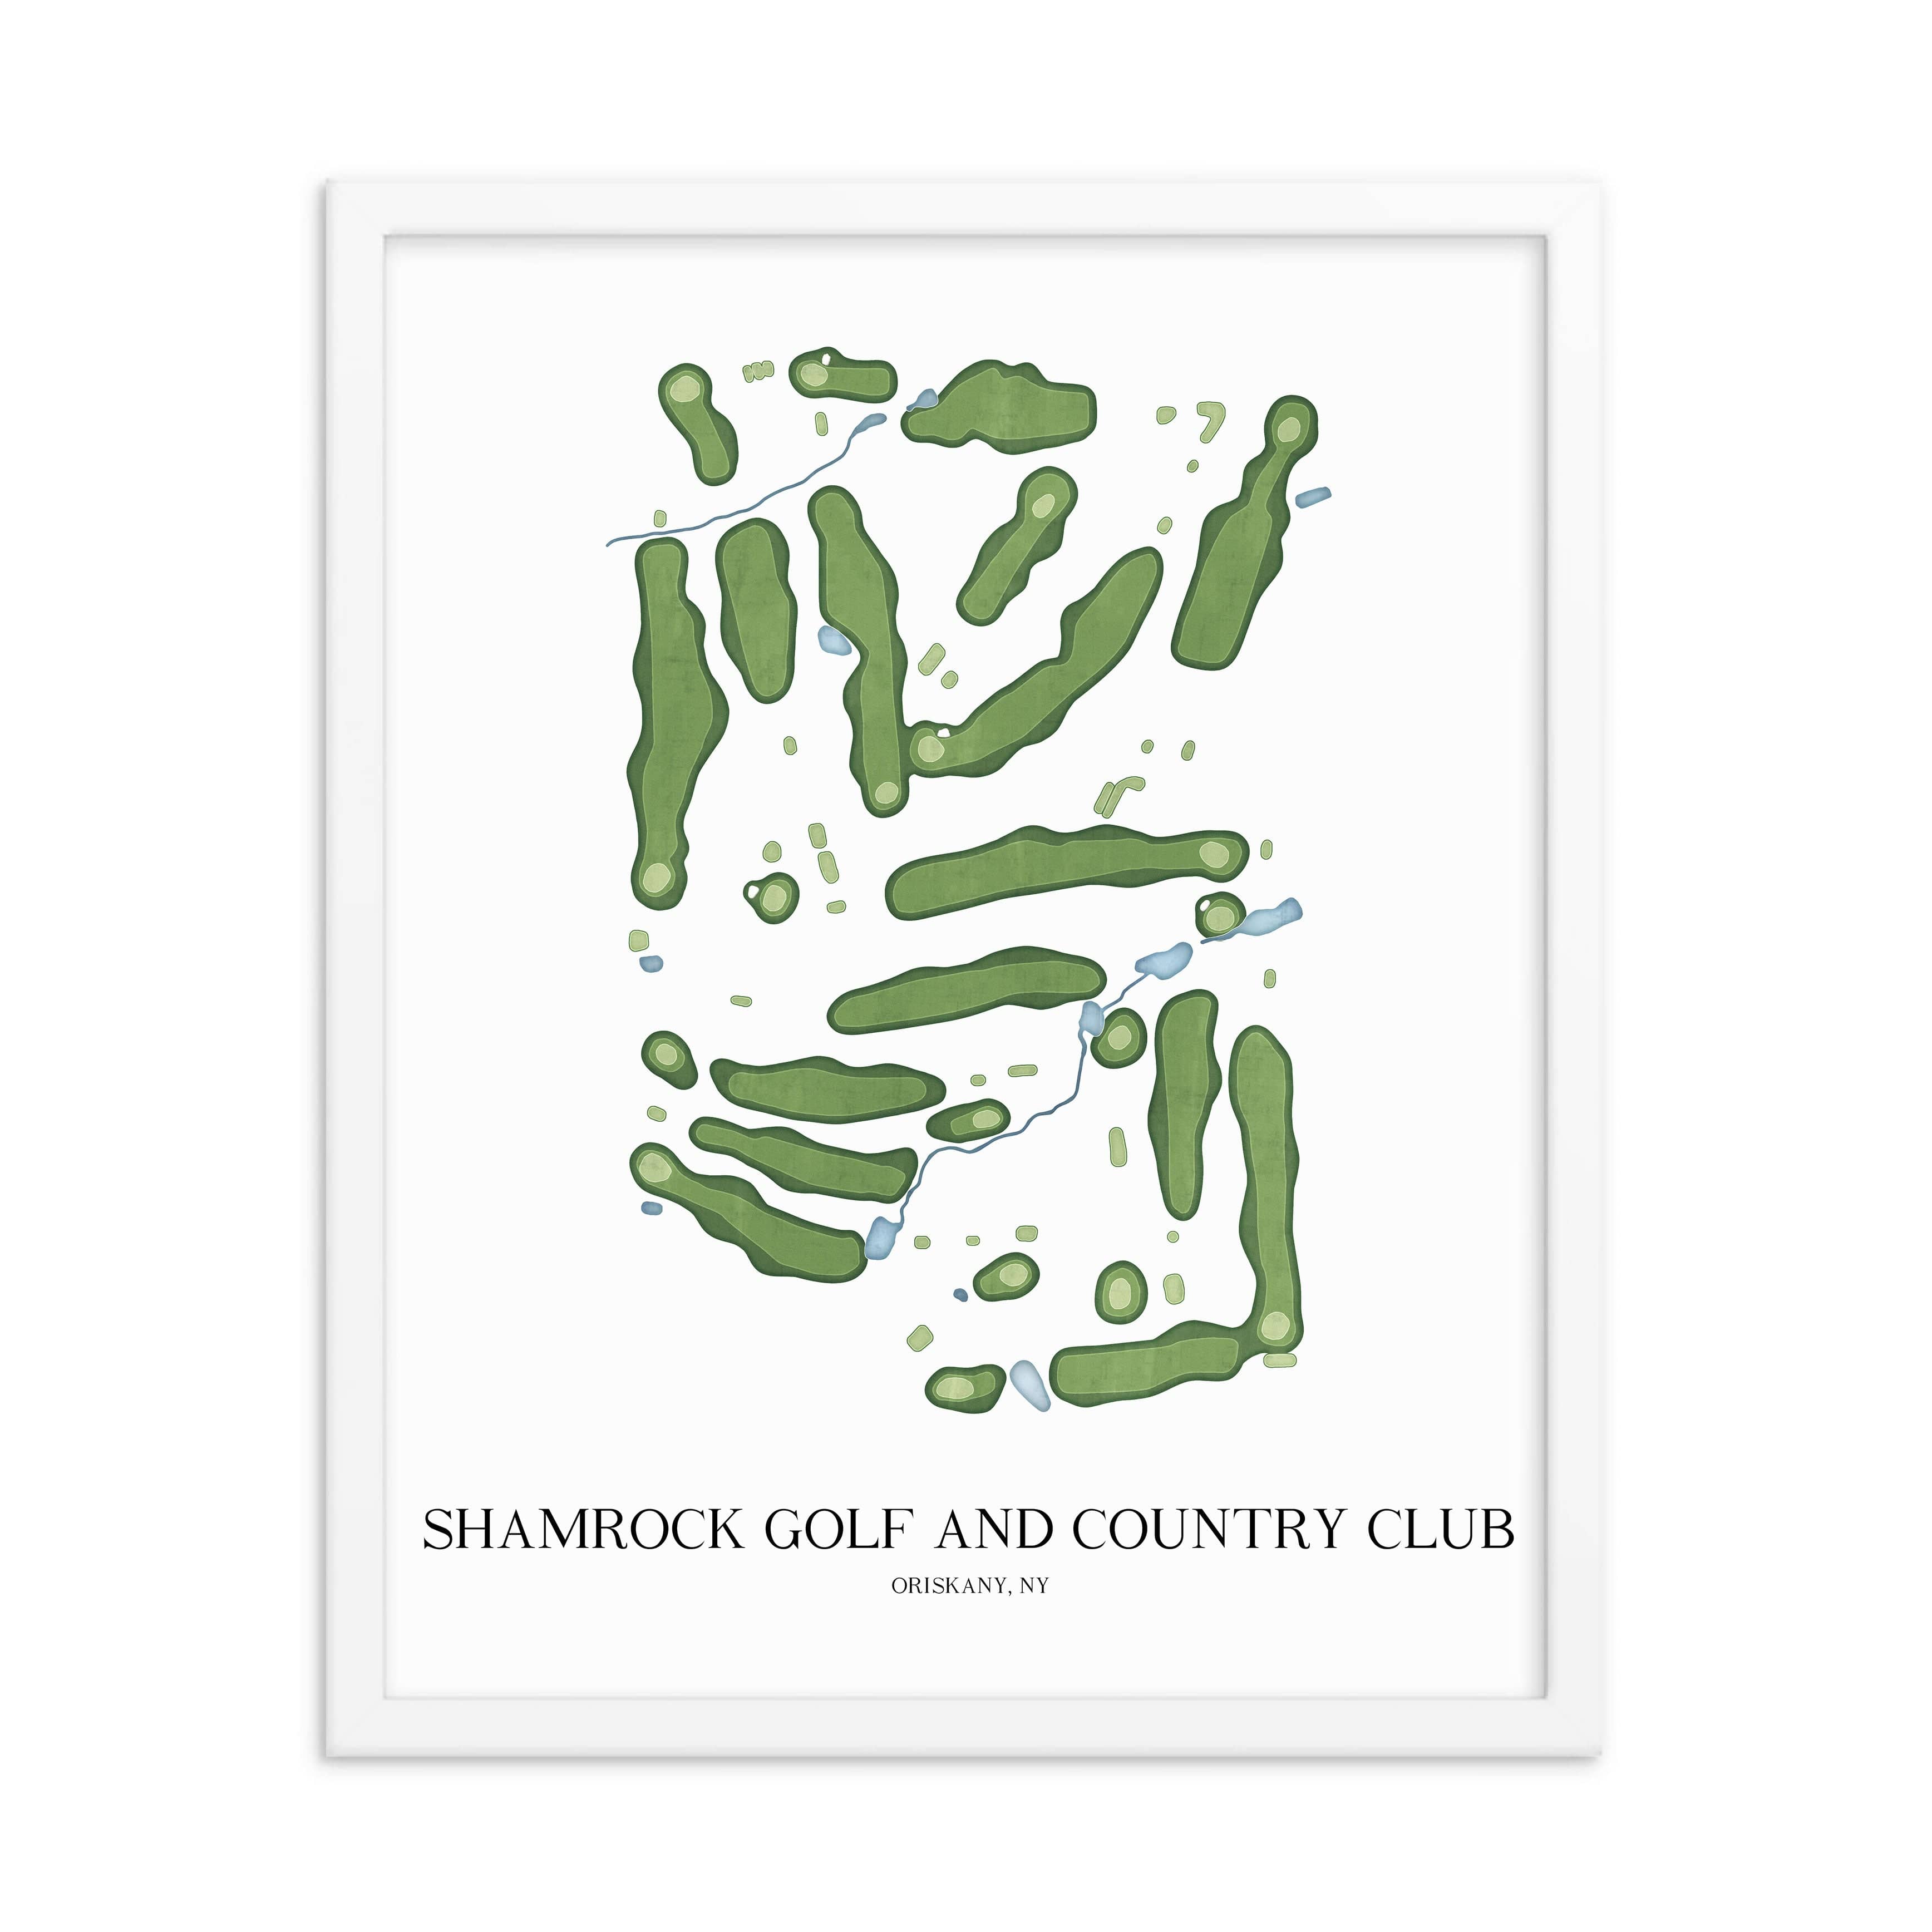 The 19th Hole Golf Shop - Golf Course Prints -  Shamrock Golf and Country Club Golf Course Map